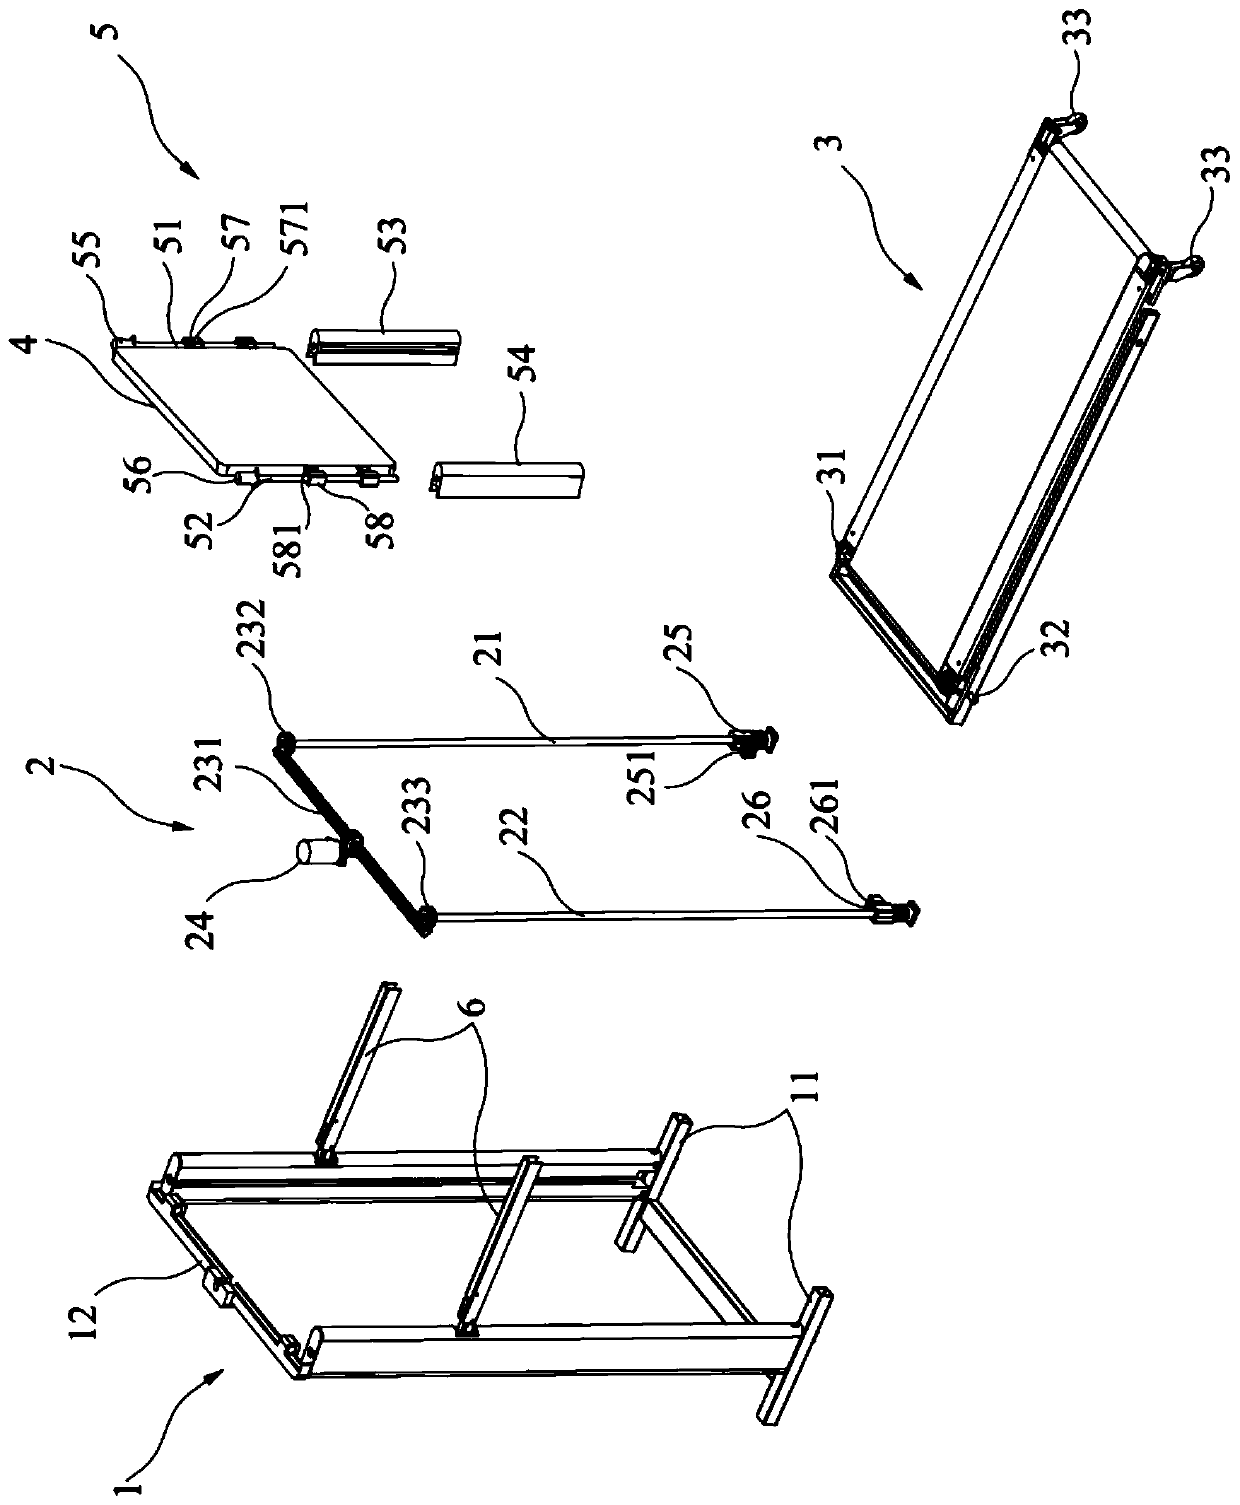 Lifting and folding integrated device of treadmill